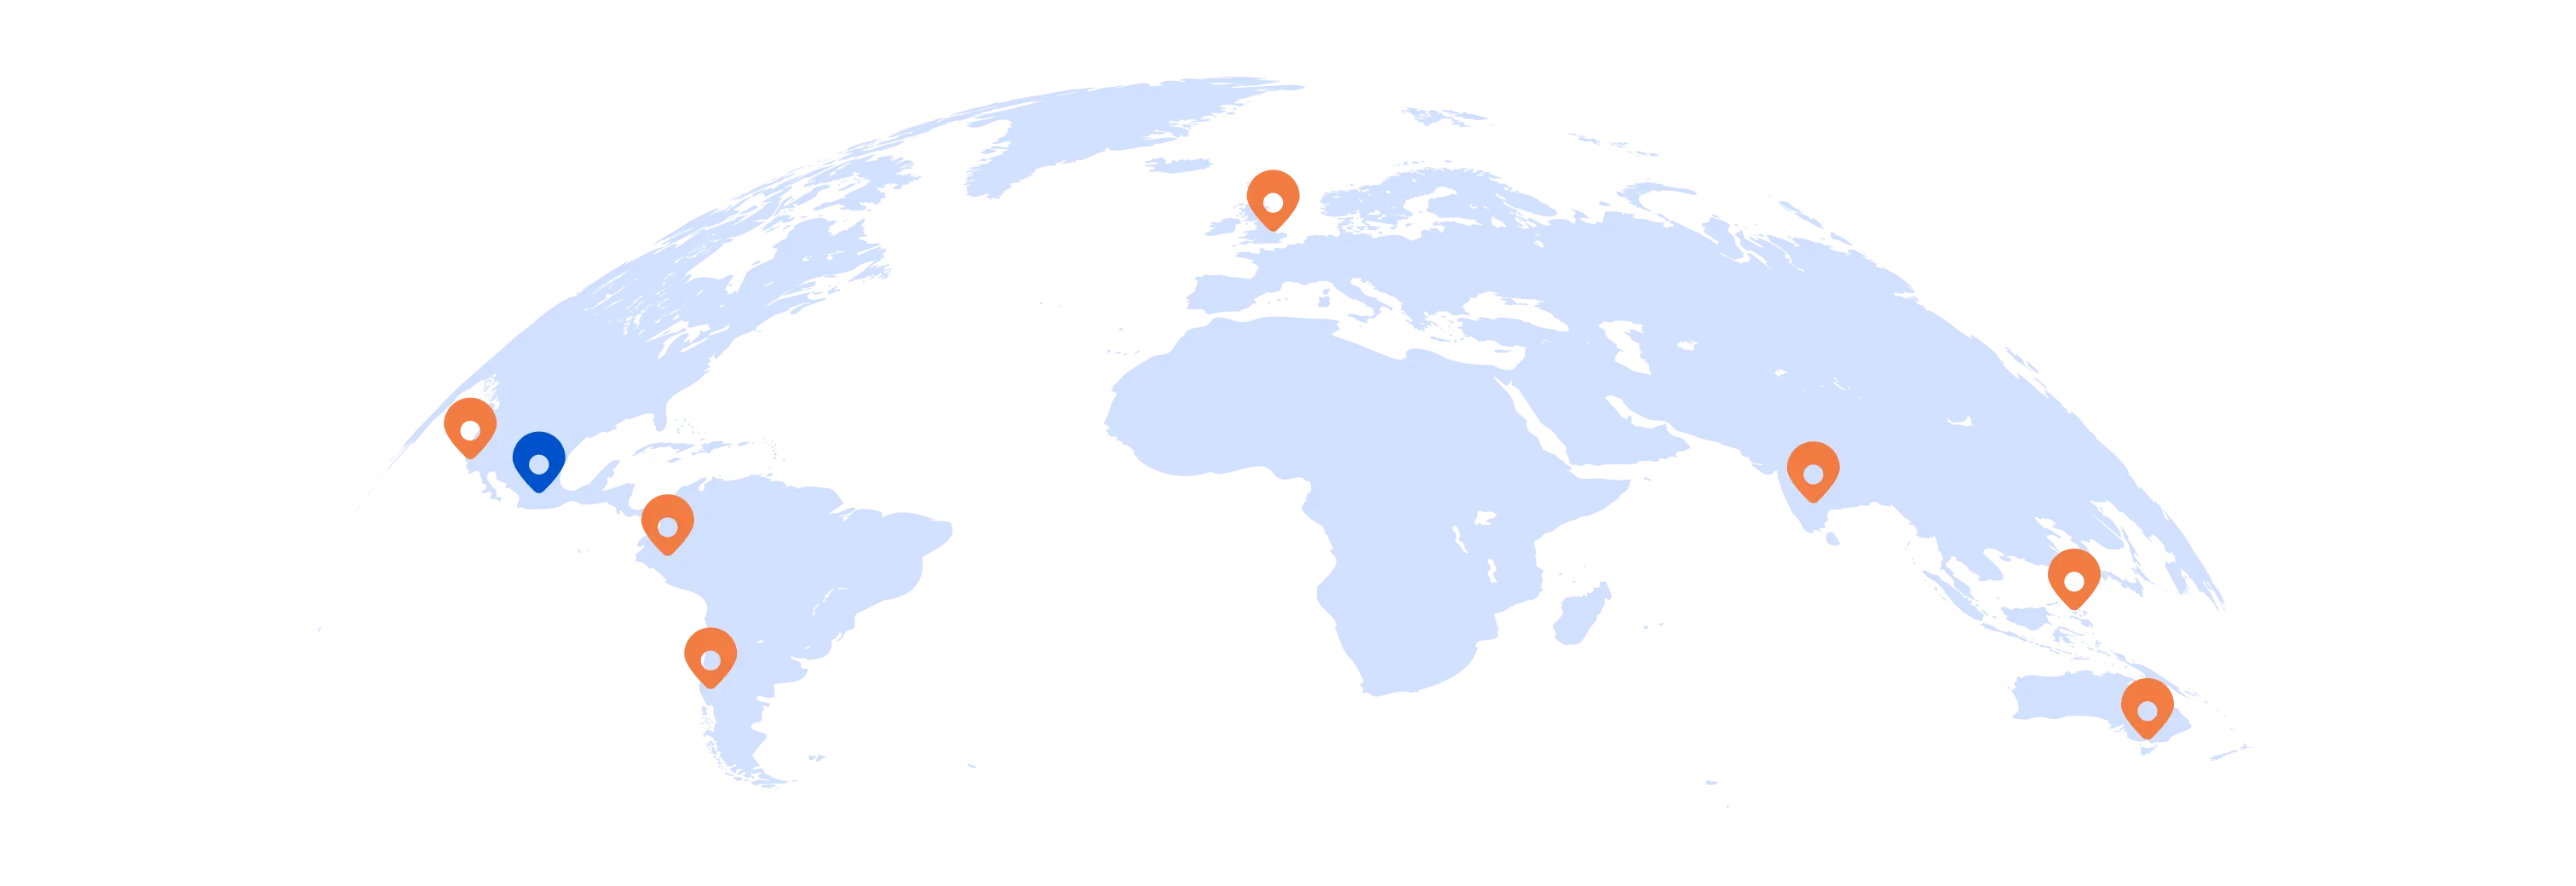 Map of DispatchTrack's locations